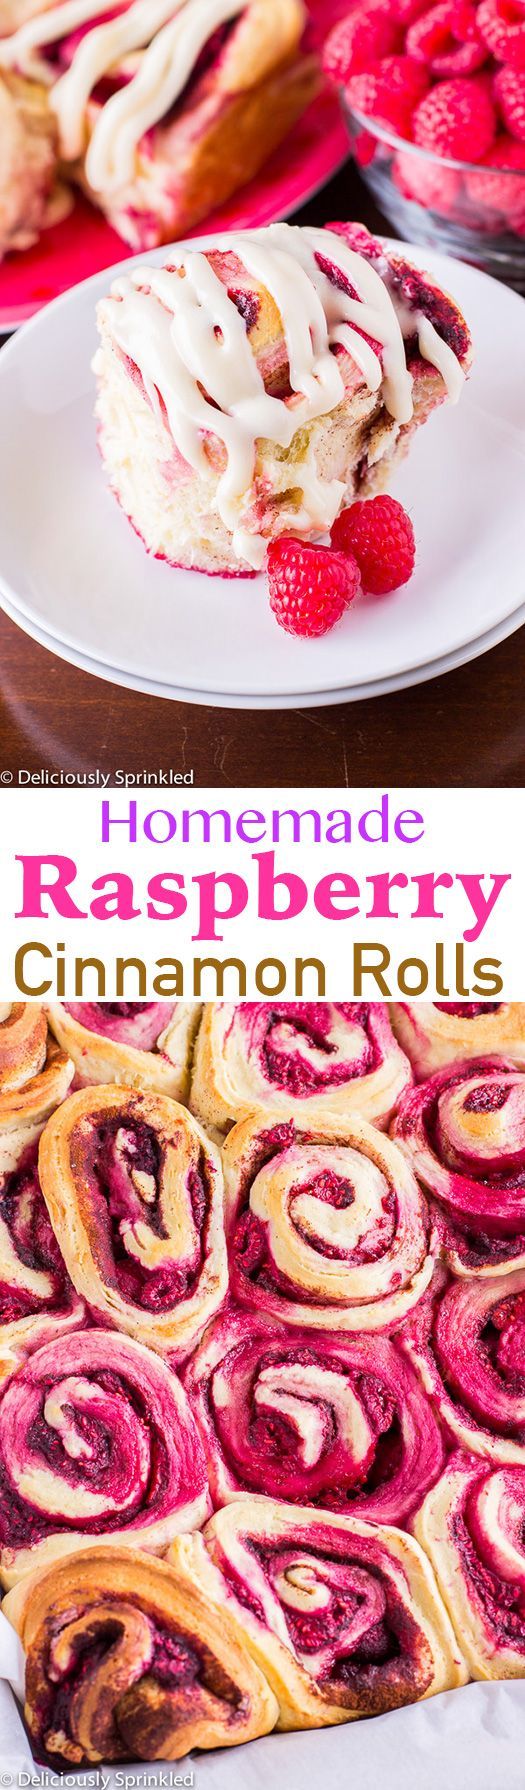 The BEST Homemade Raspberry Cinnamon Rolls with Cream Cheese Frosting